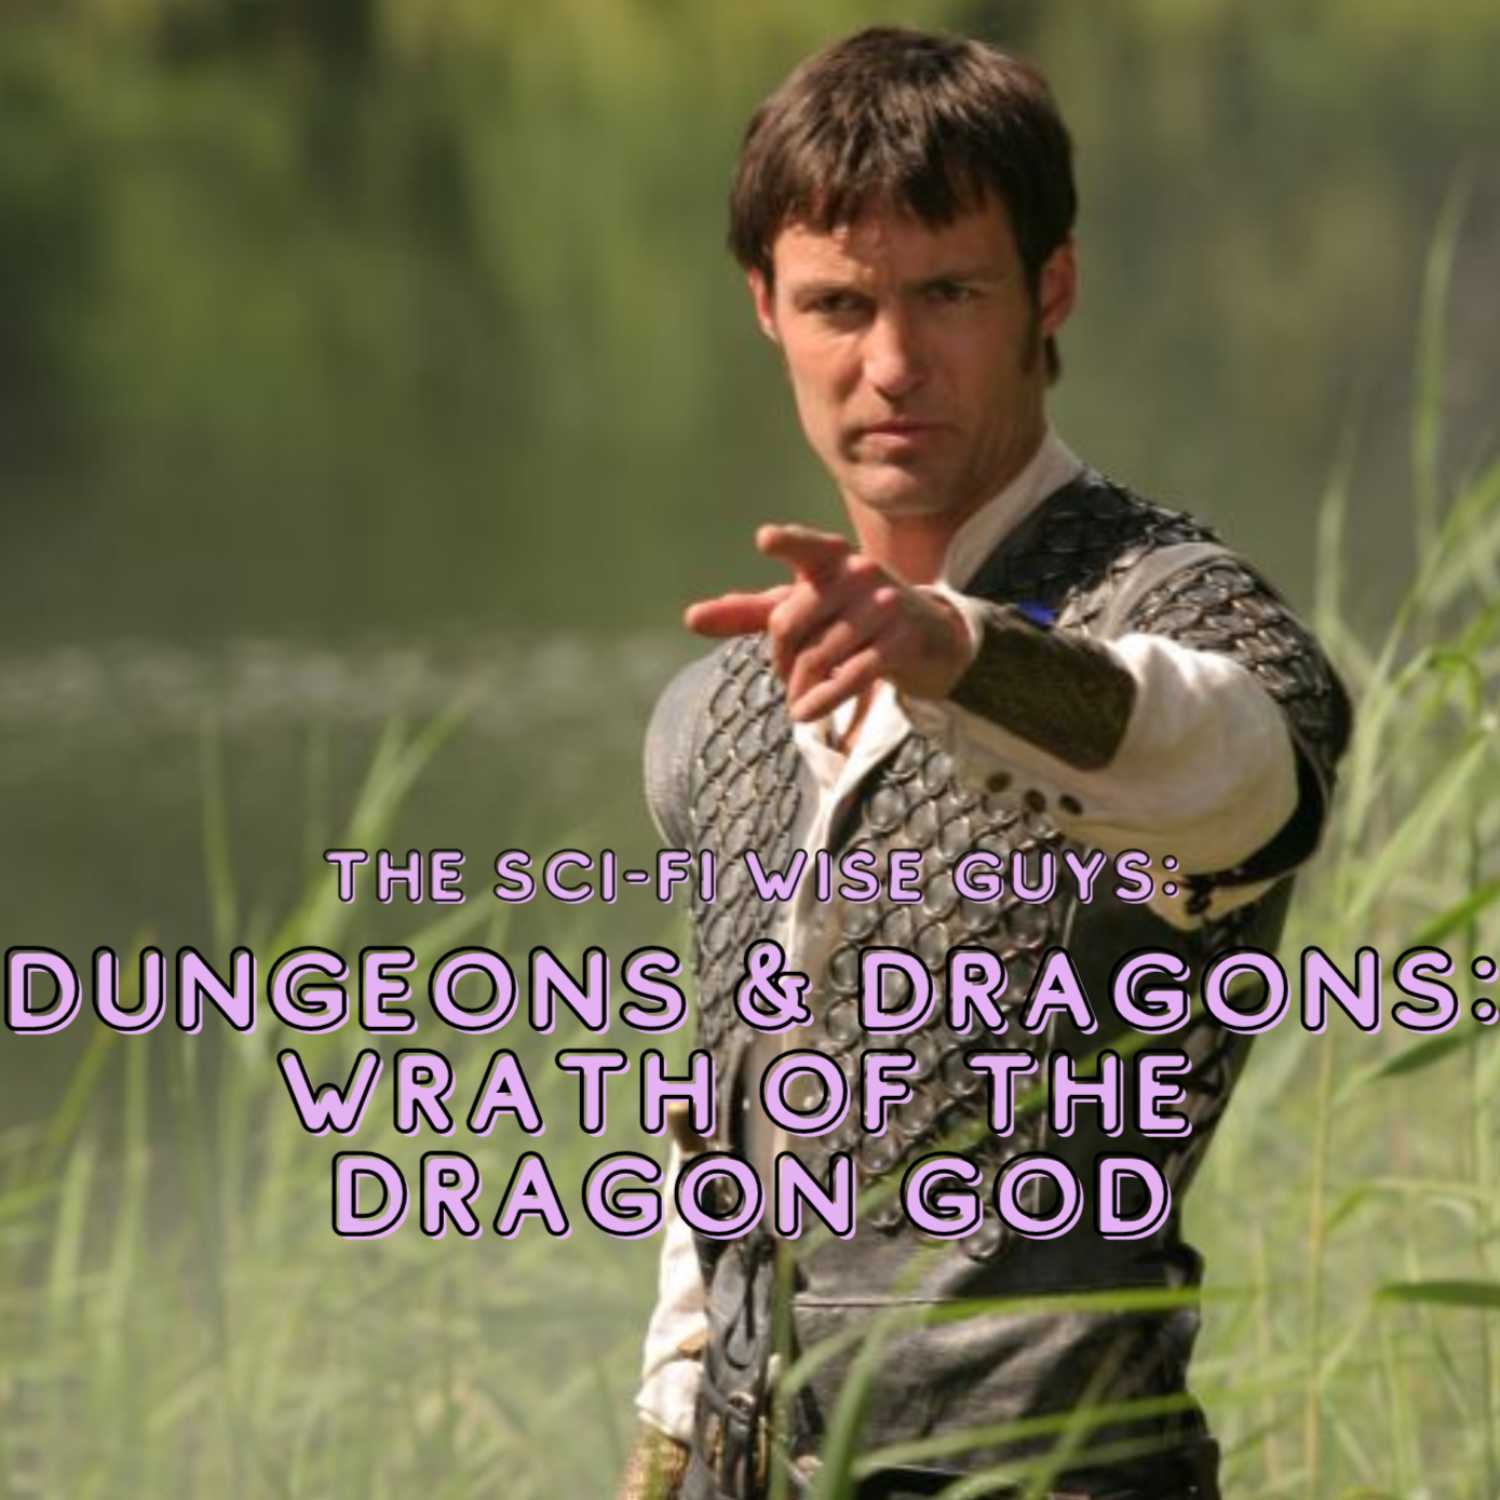 Every Dragon Has Its Day (Dungeons & Dragons: Wrath of the Dragon God)